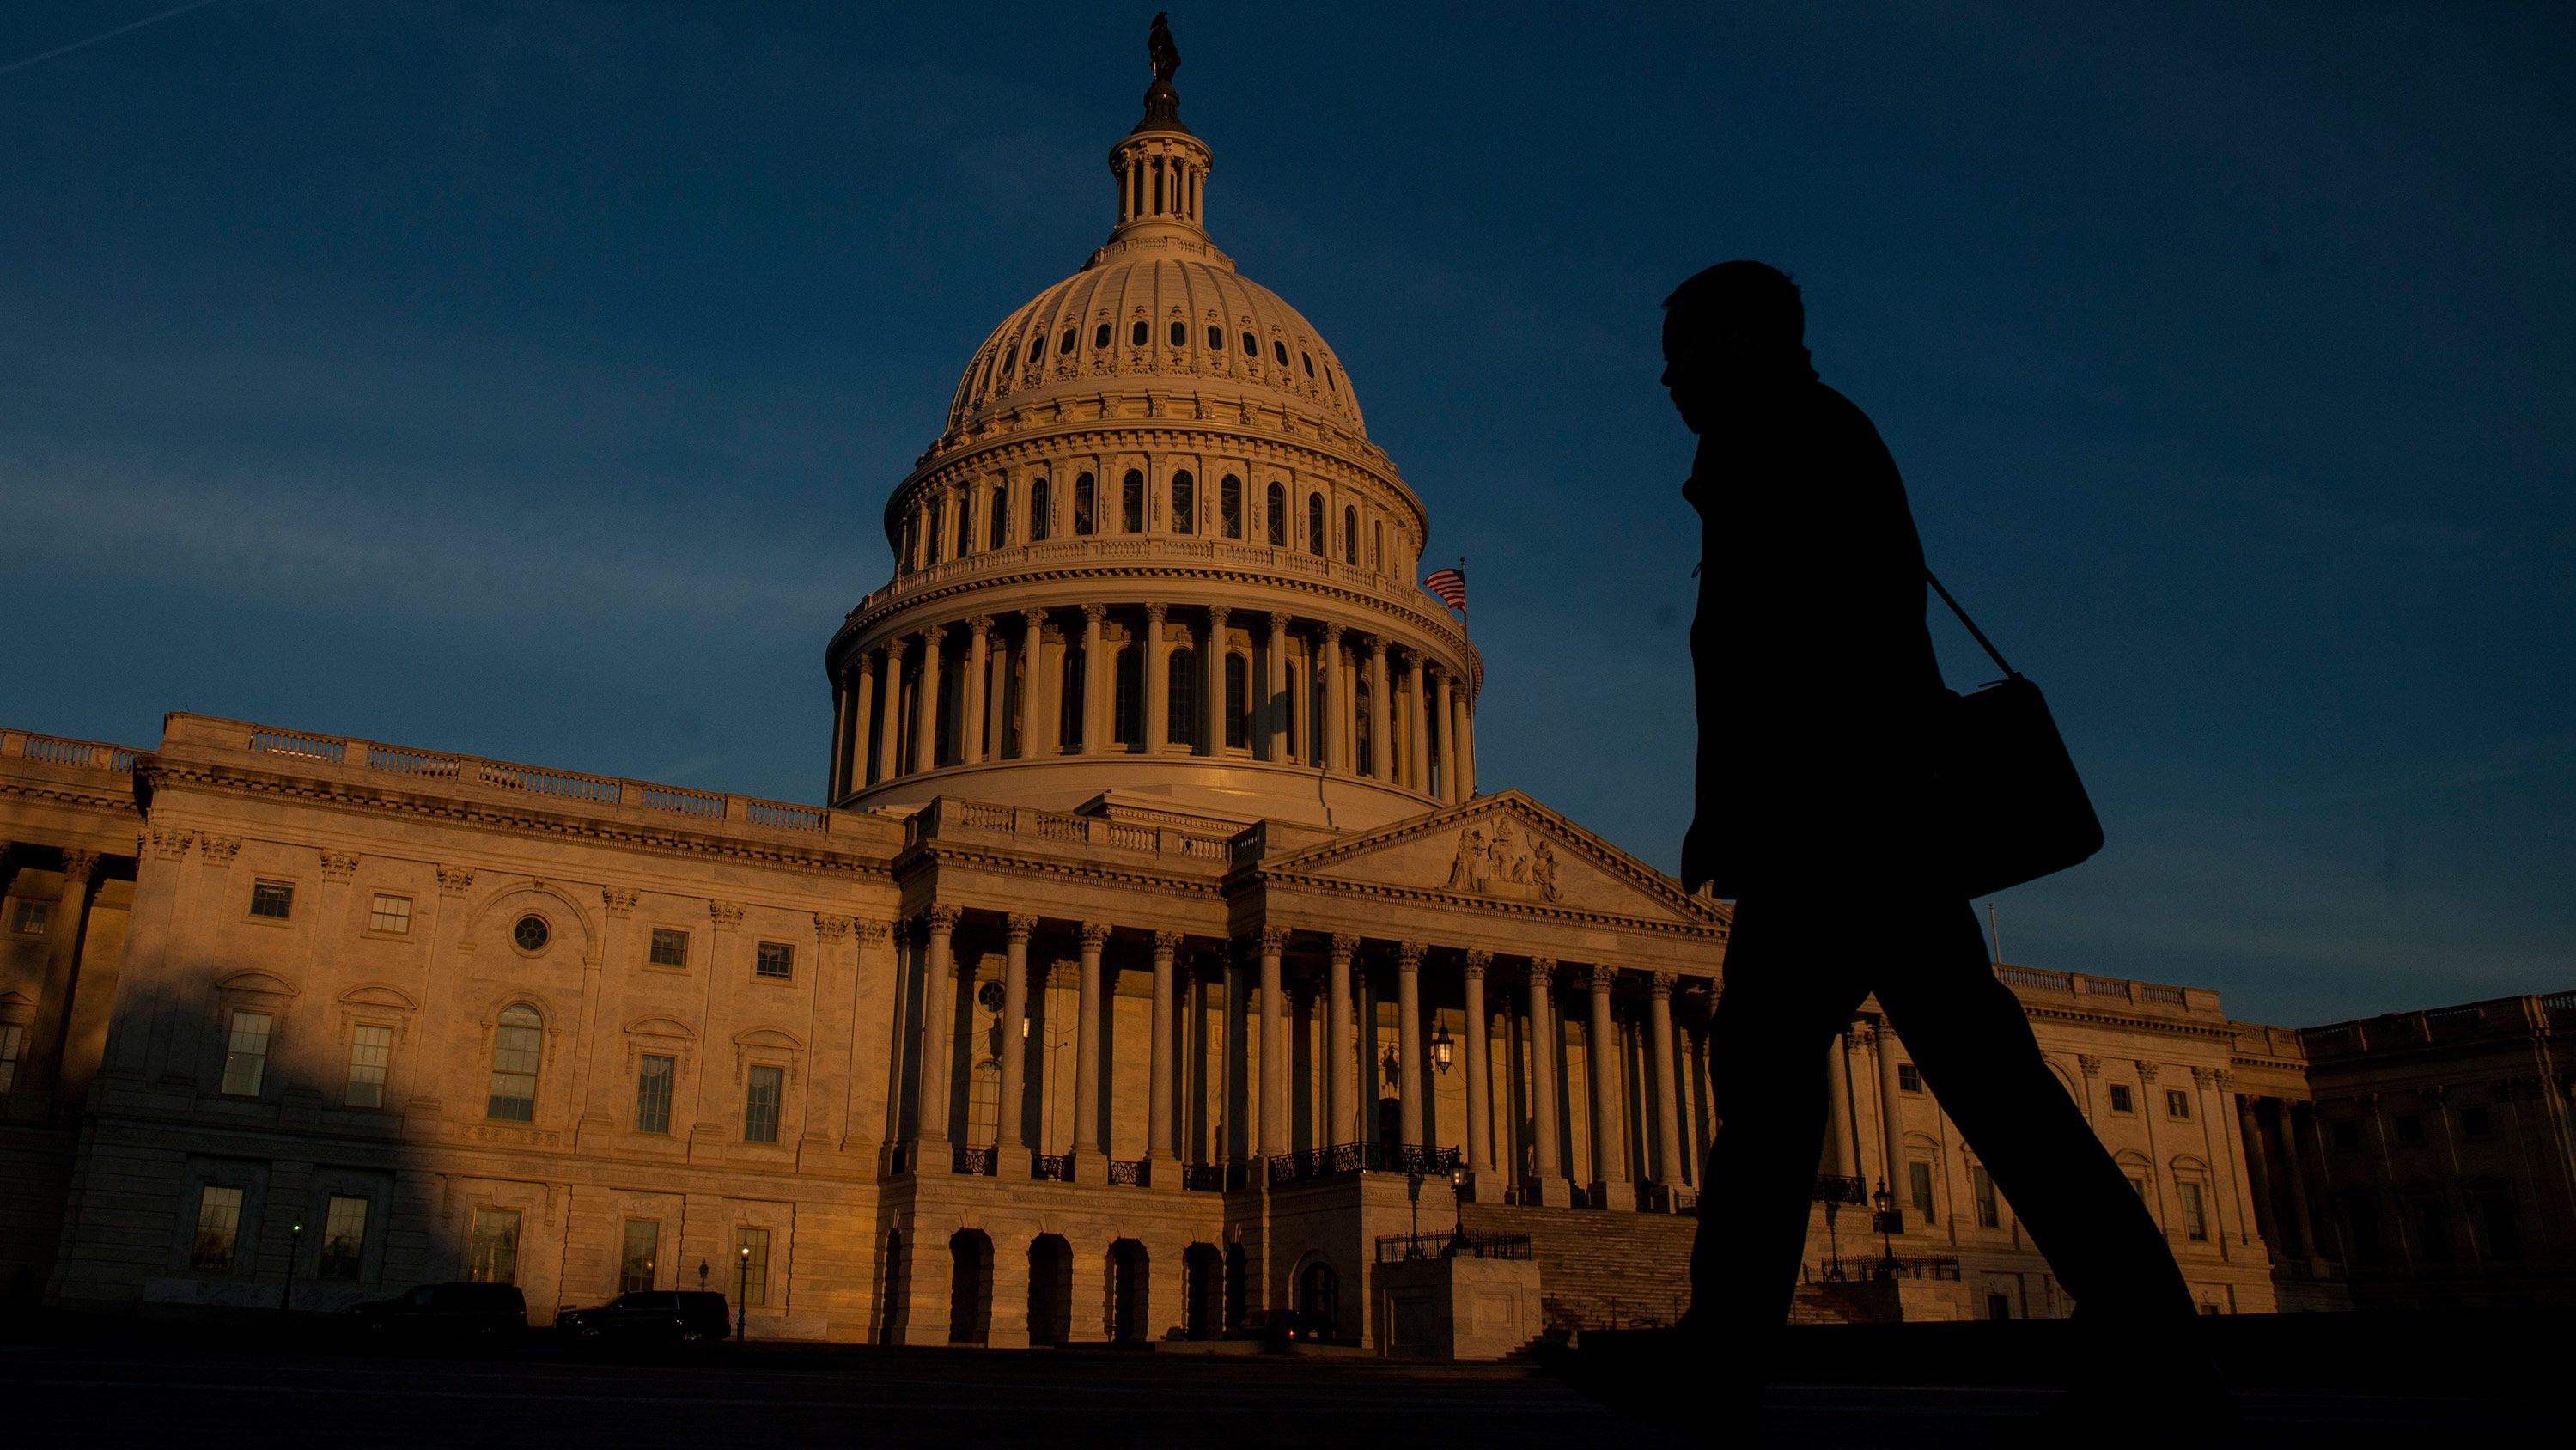 WASHINGTON, D.C. - MARCH 20:  A person walks by as the sun rises near The United States Capitol Building on March 20, 2017 in Washington, D.C. (Photo by Zach Gibson/Getty Images)